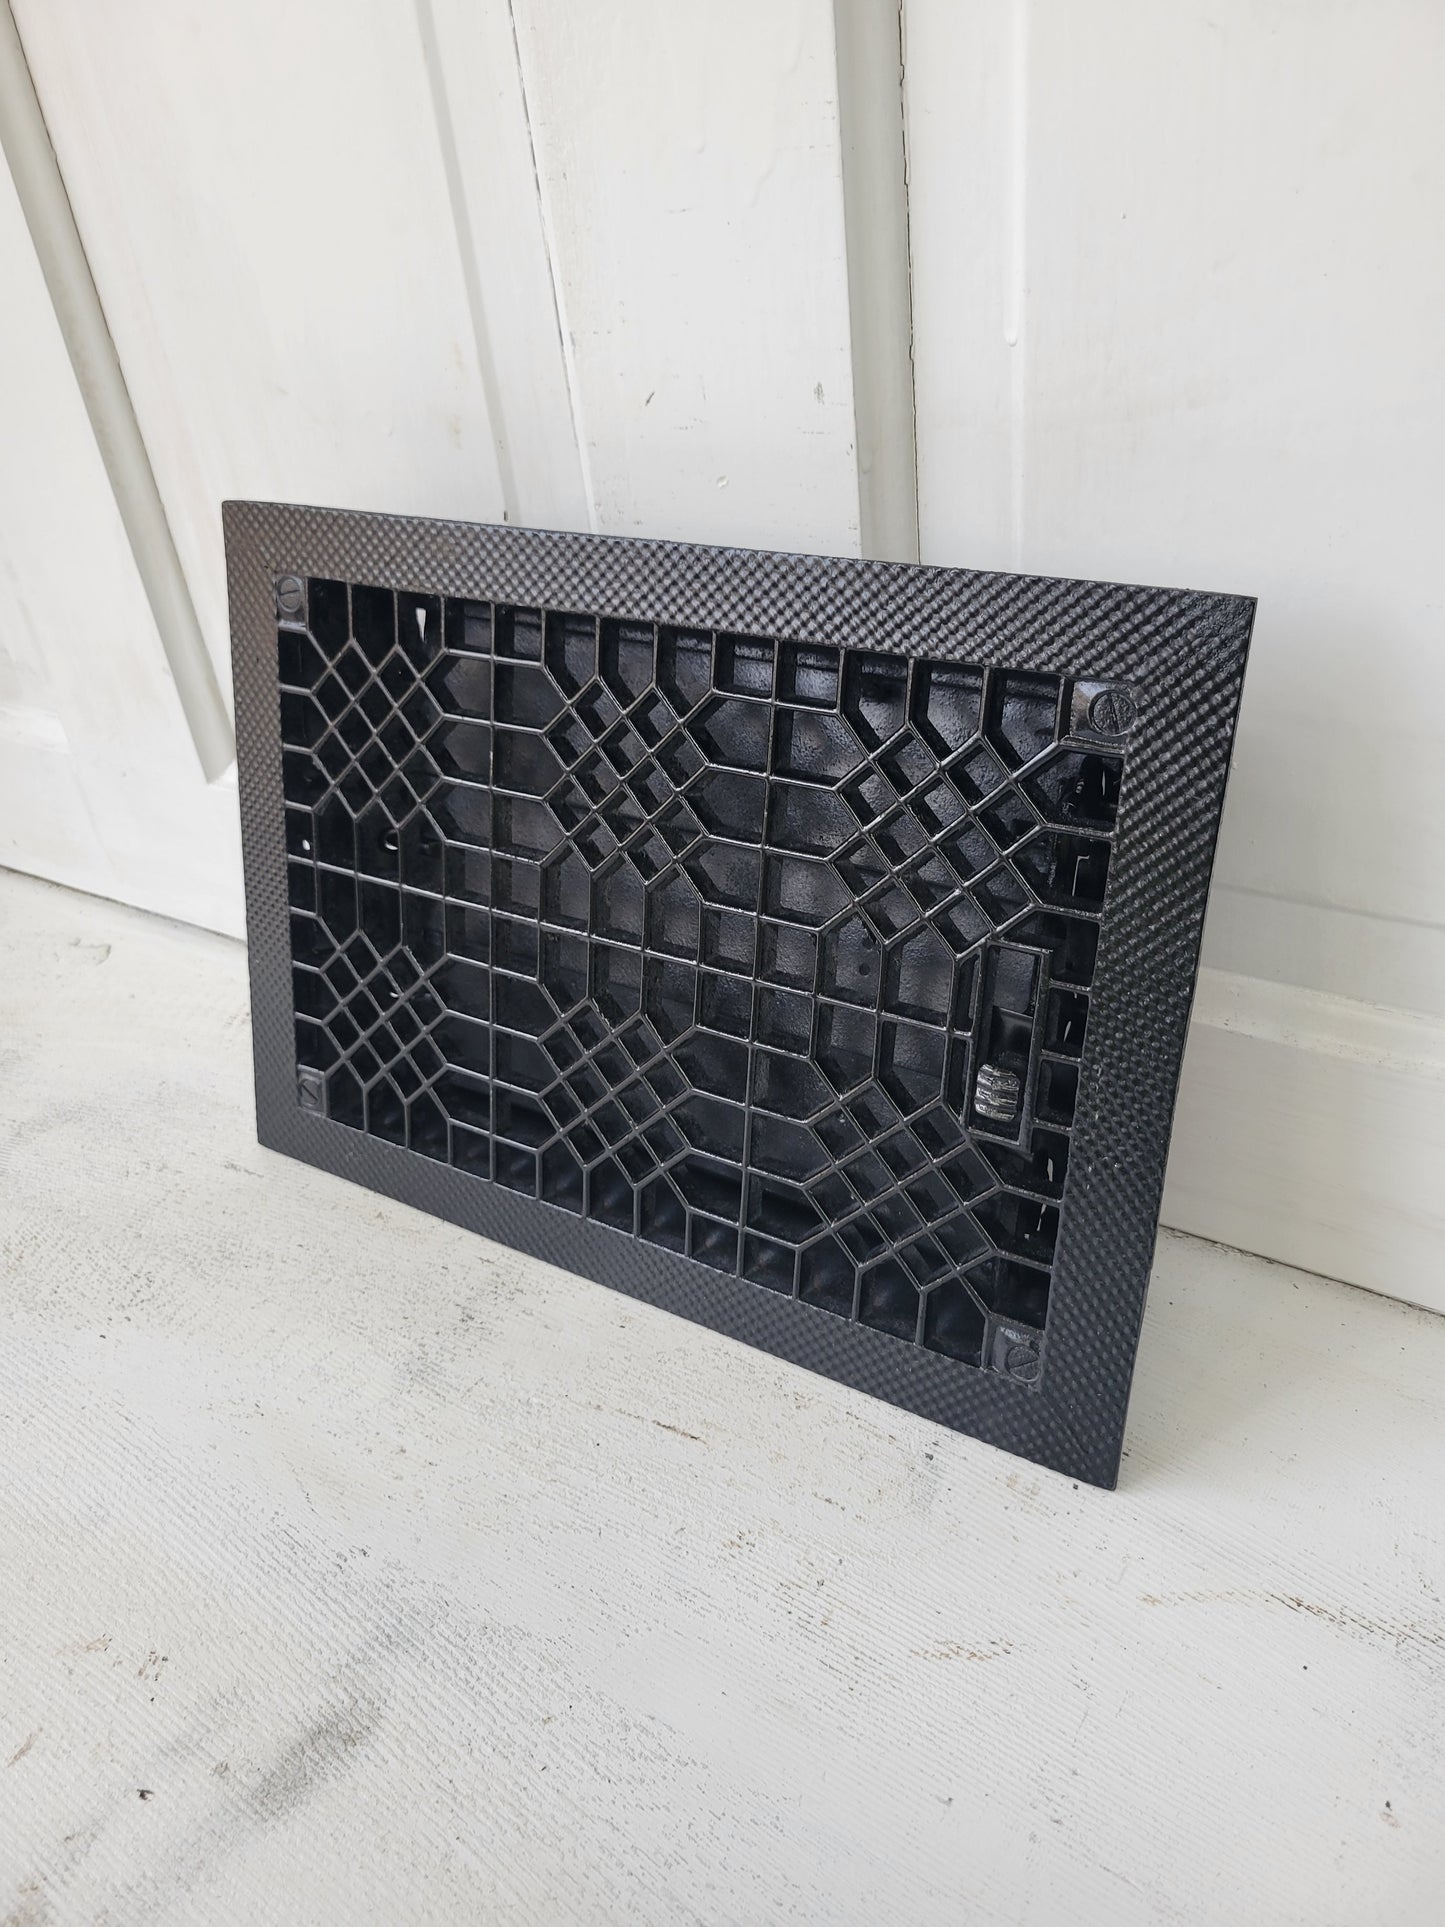 Working 11 x 14 Cast Iron Vent Cover Insert, Floor Register Cover #062607